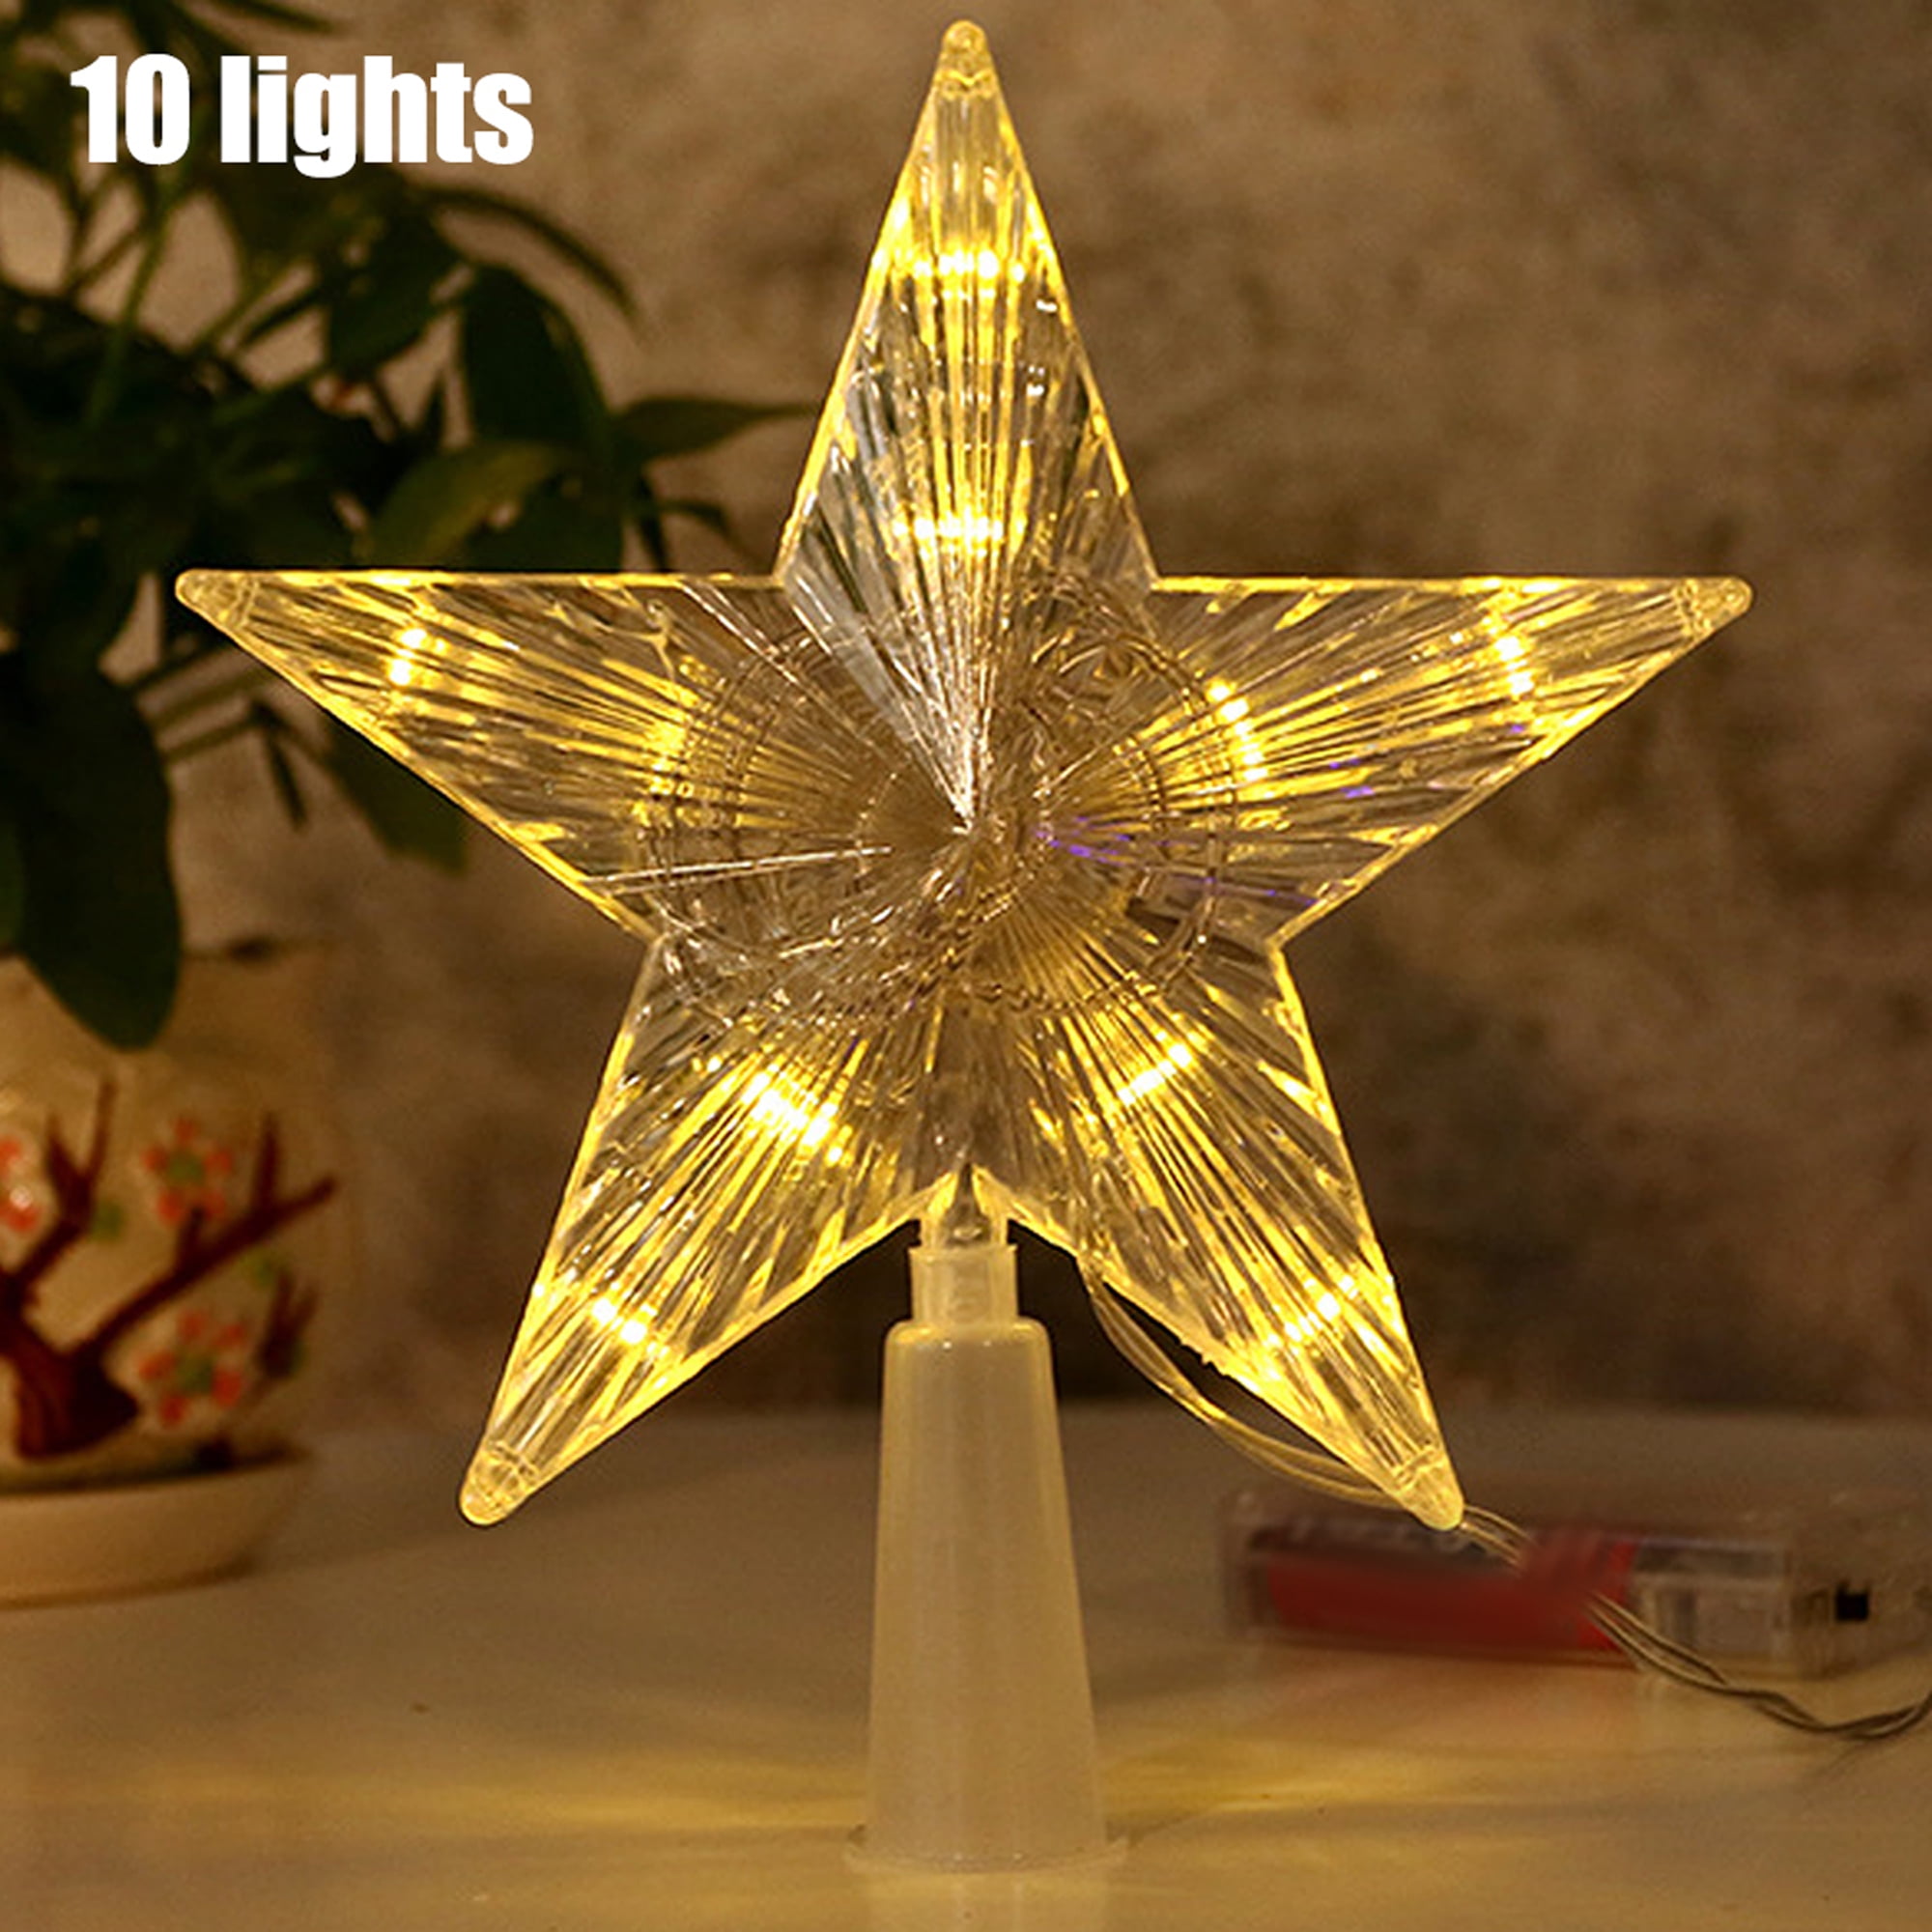 LED Colorful Five-pointed Star Lamp Xmas Light Christmas Tree Topper Party Decor 